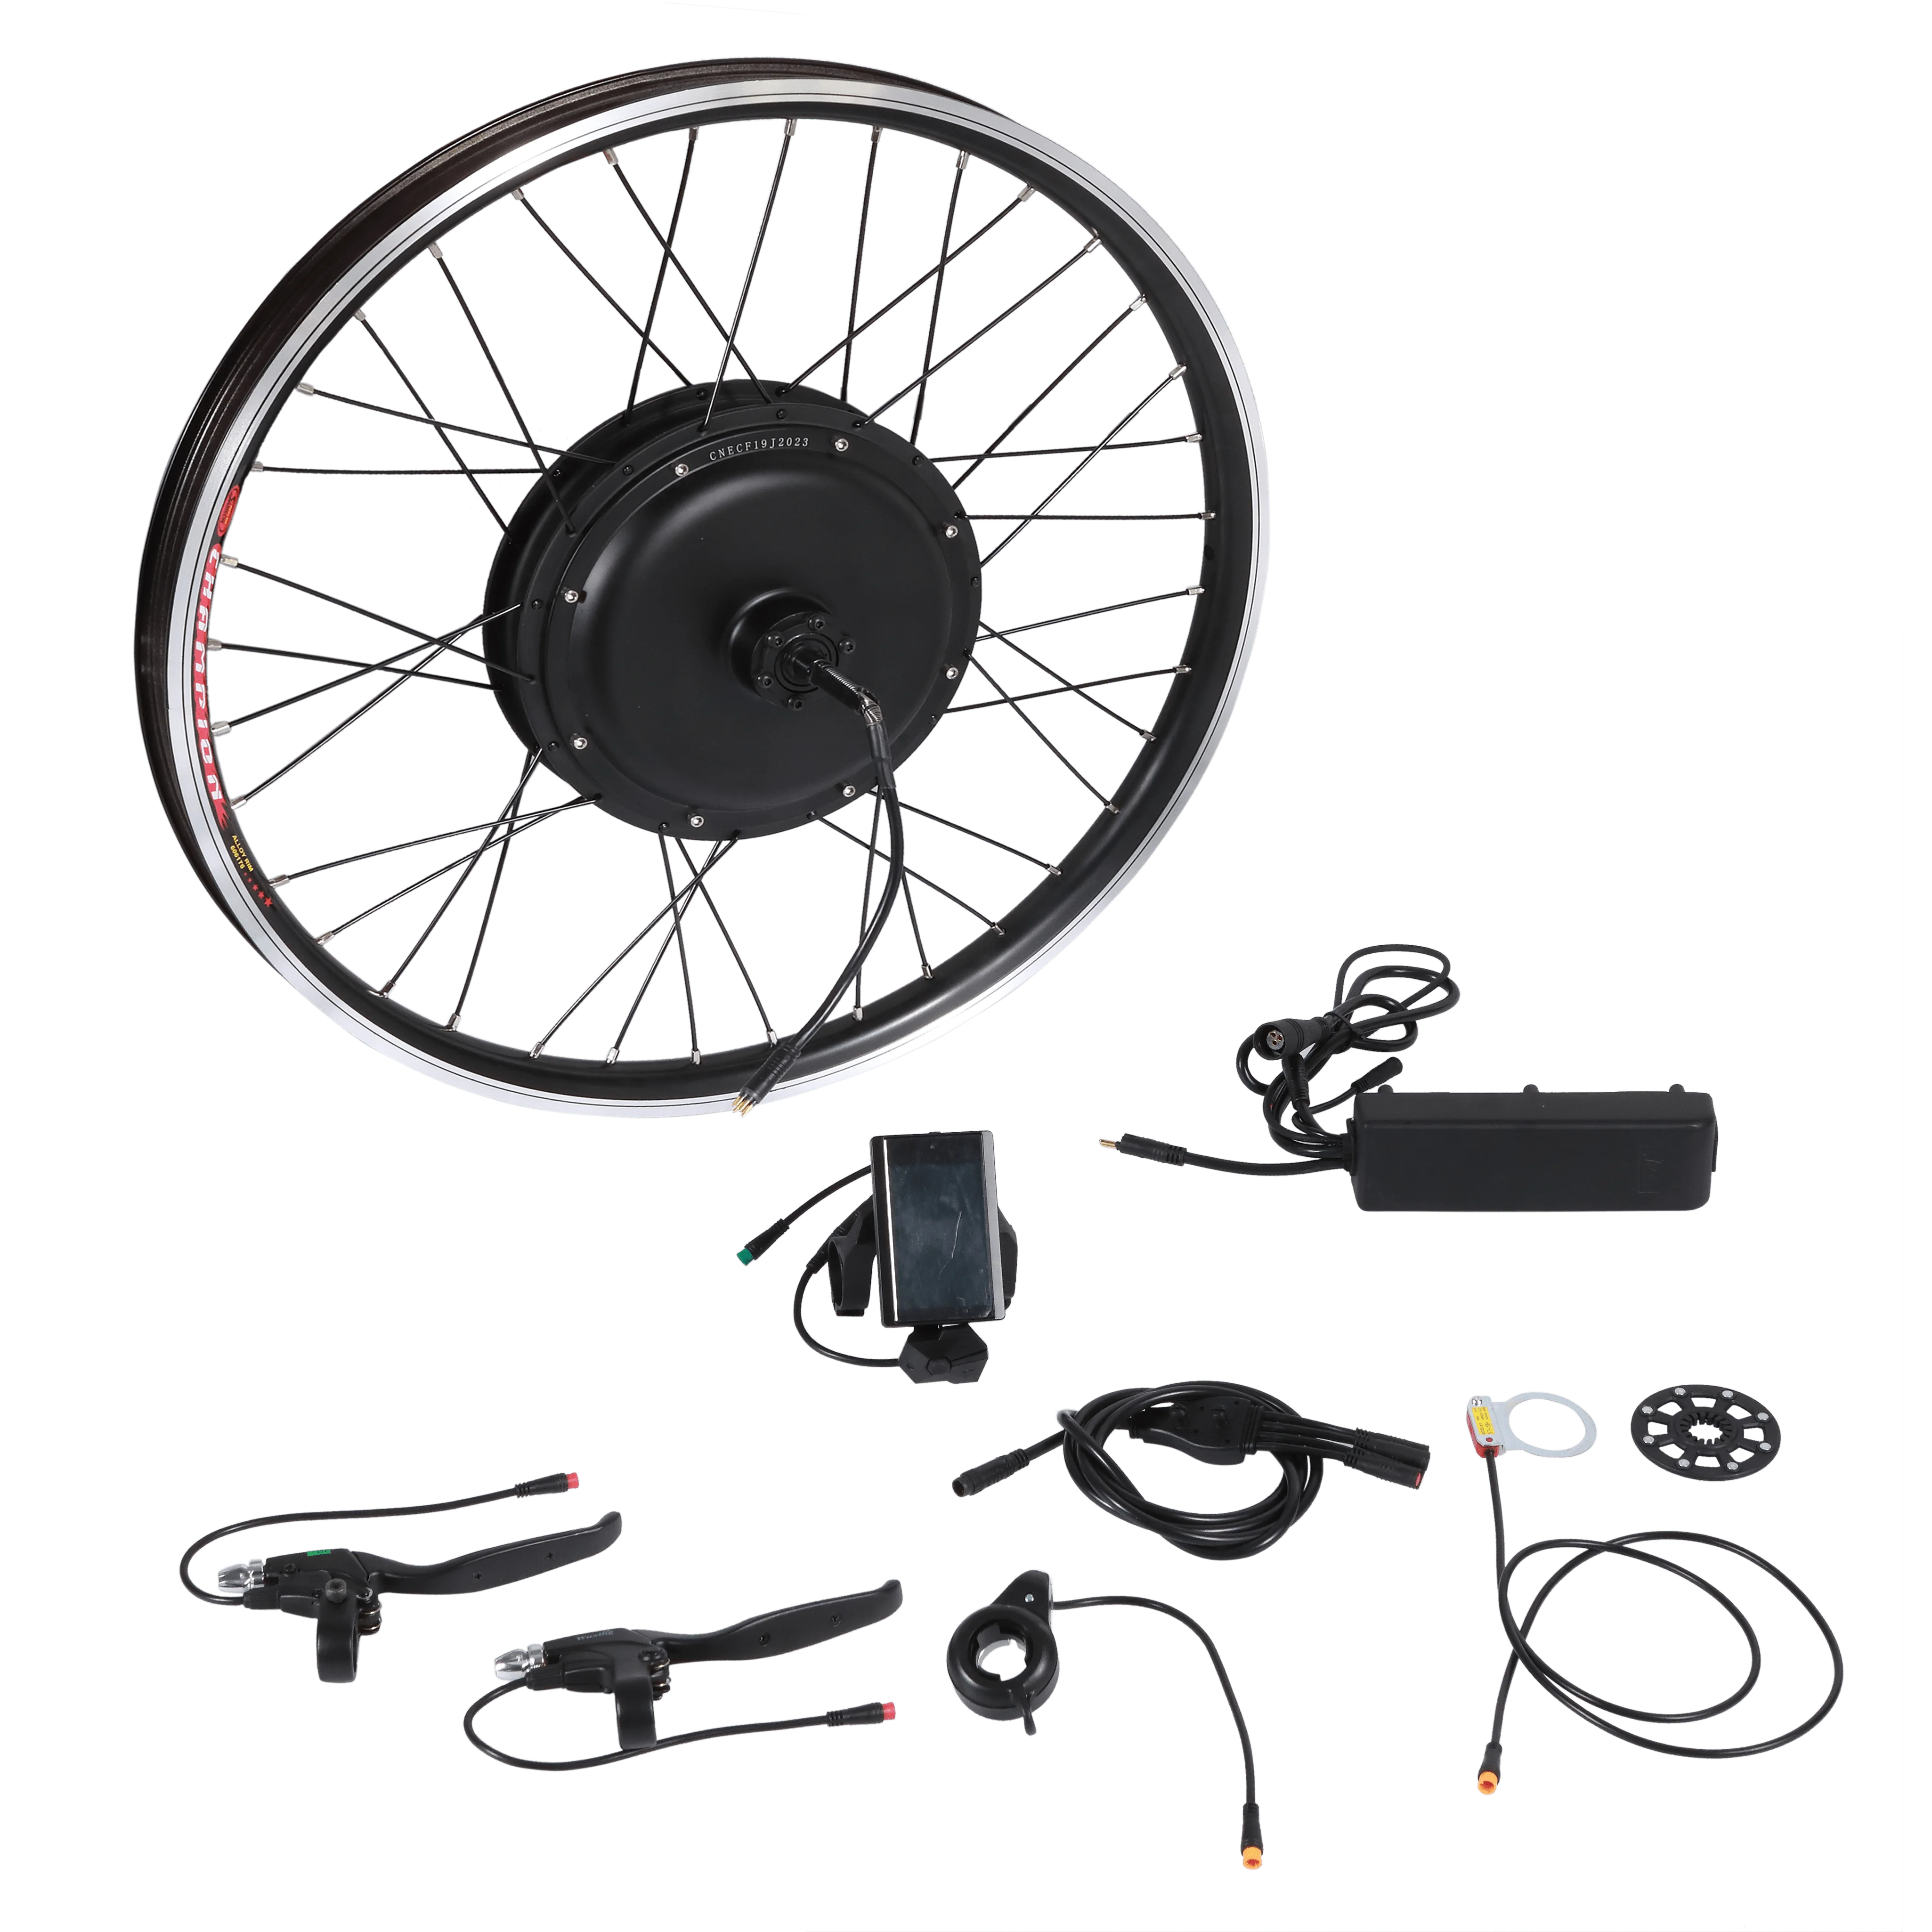 Front 26" Wheel Electric Bike Motor Conversion Kit Acceleration Power Cycling US 